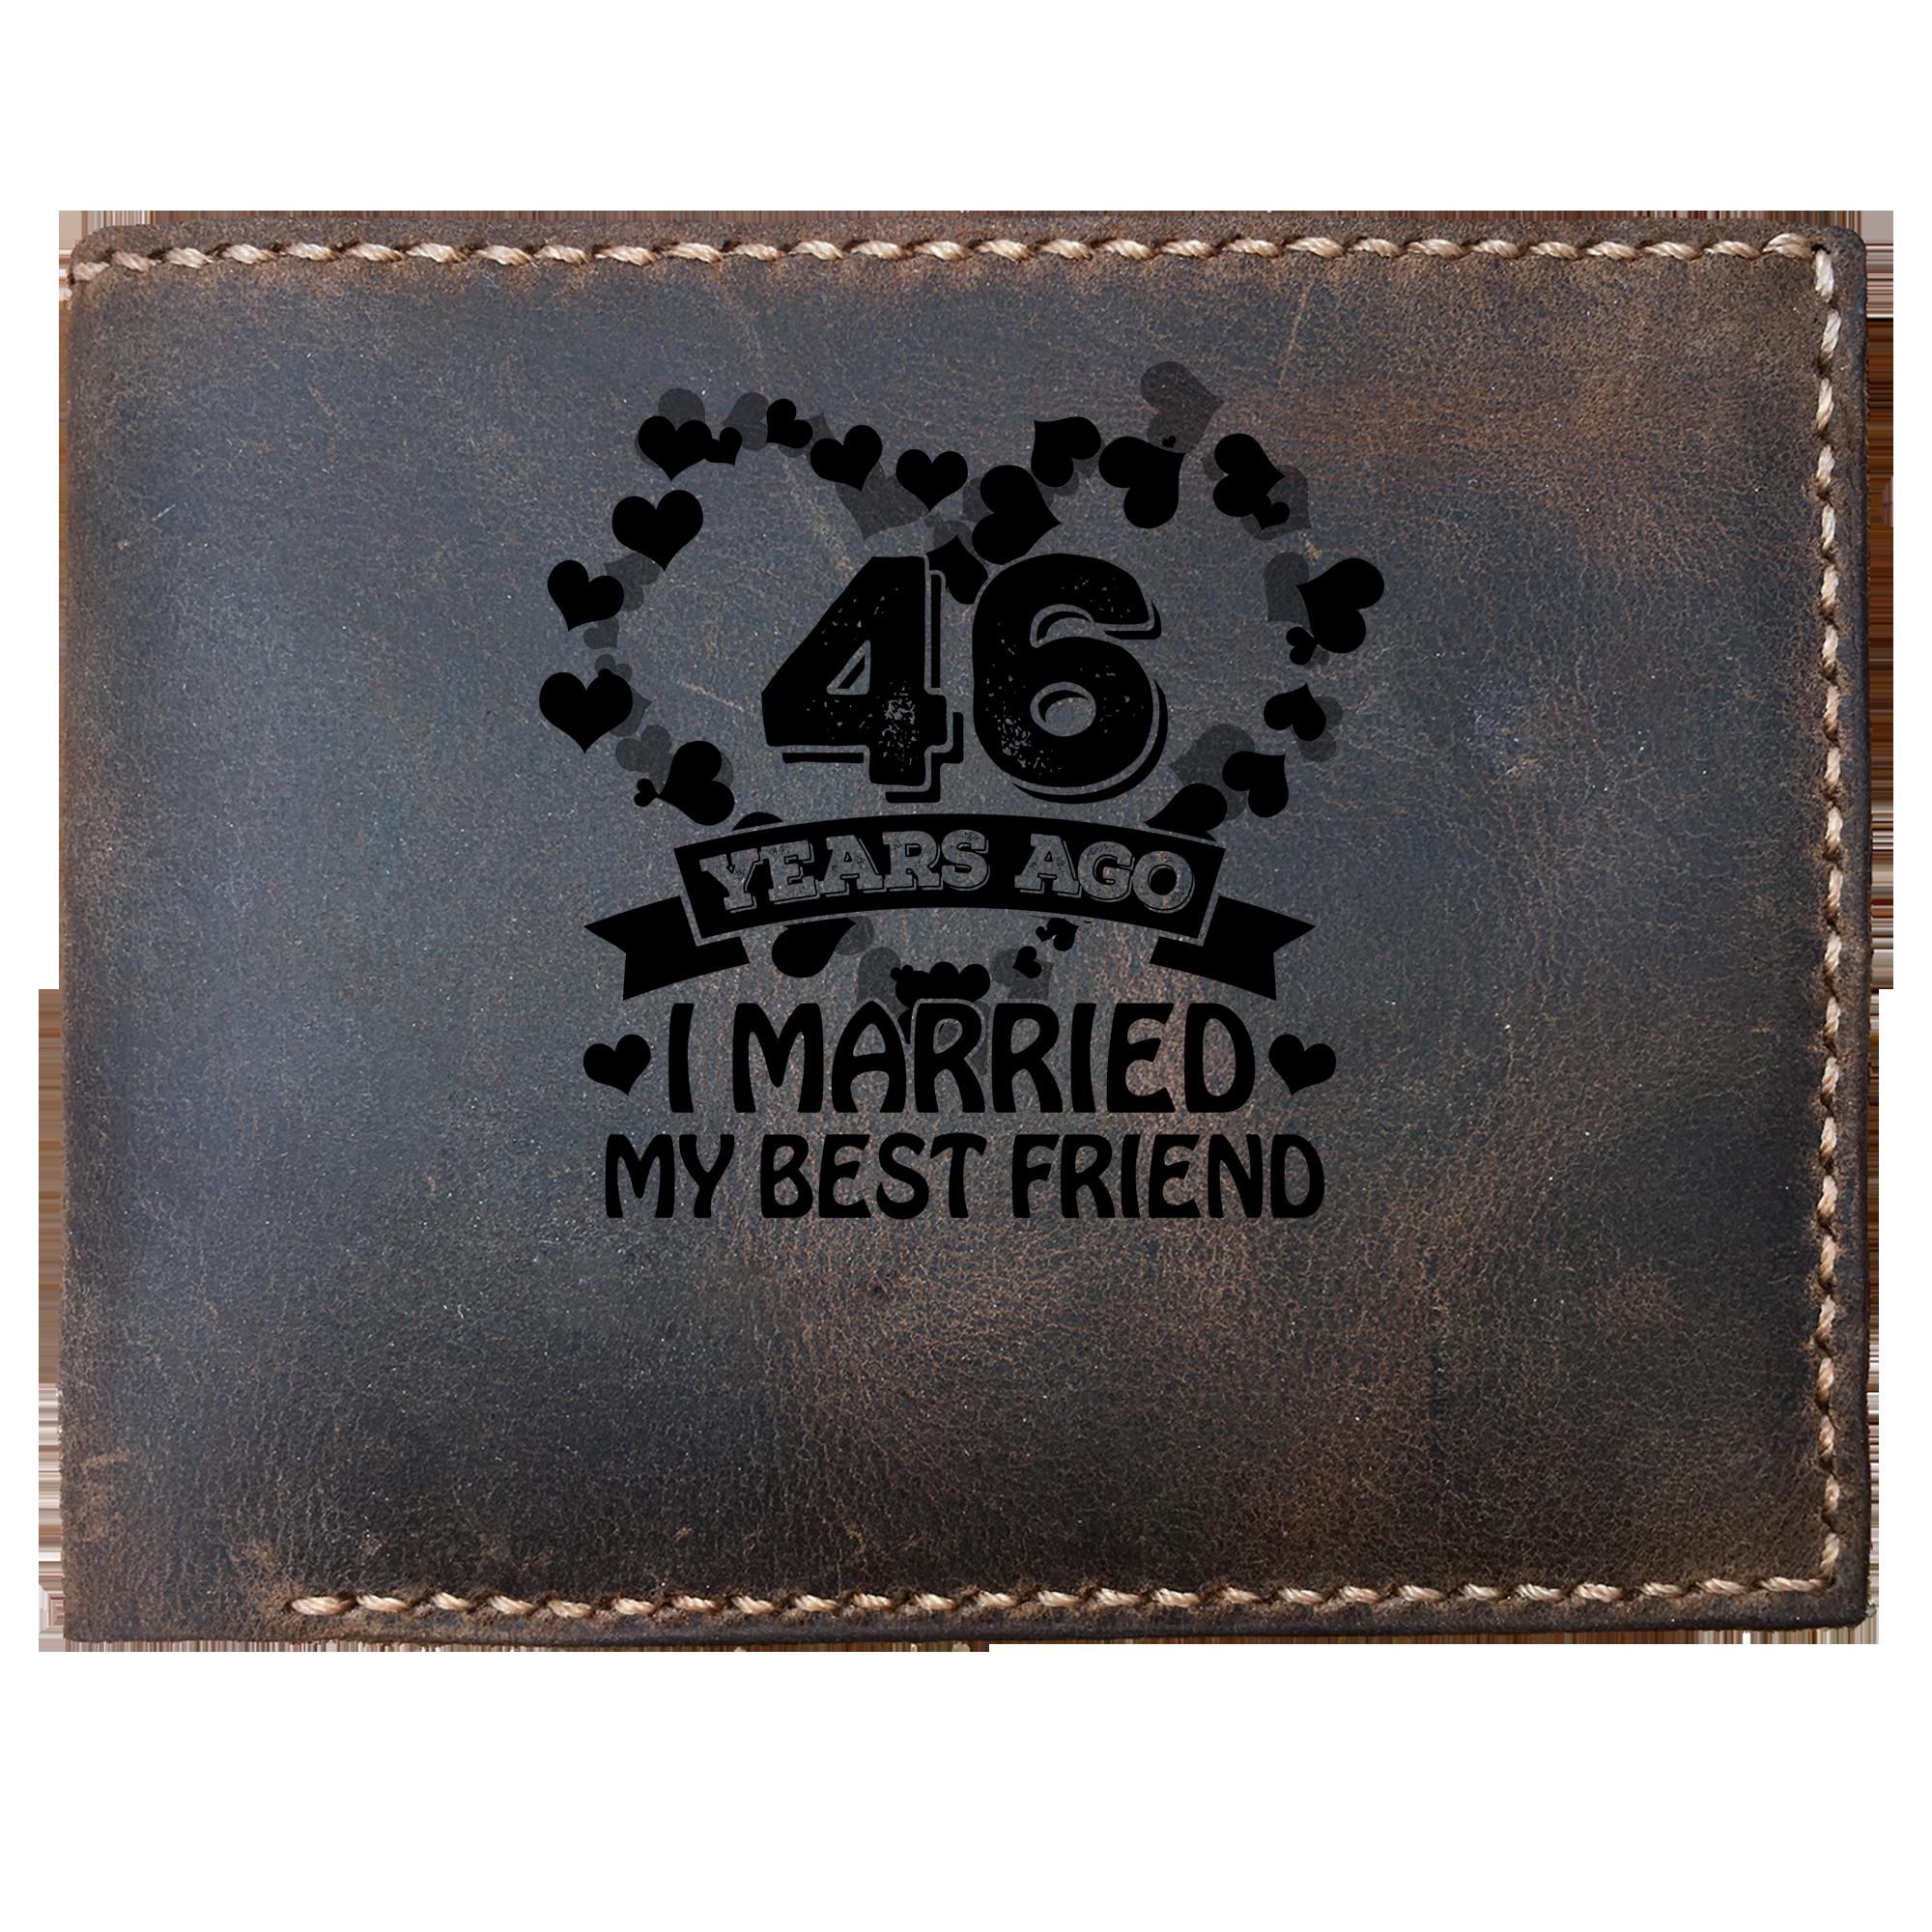 Skitongifts Funny Custom Laser Engraved Bifold Leather Wallet For Men, Custom Years Ago Anniversary I Married My Best Friend